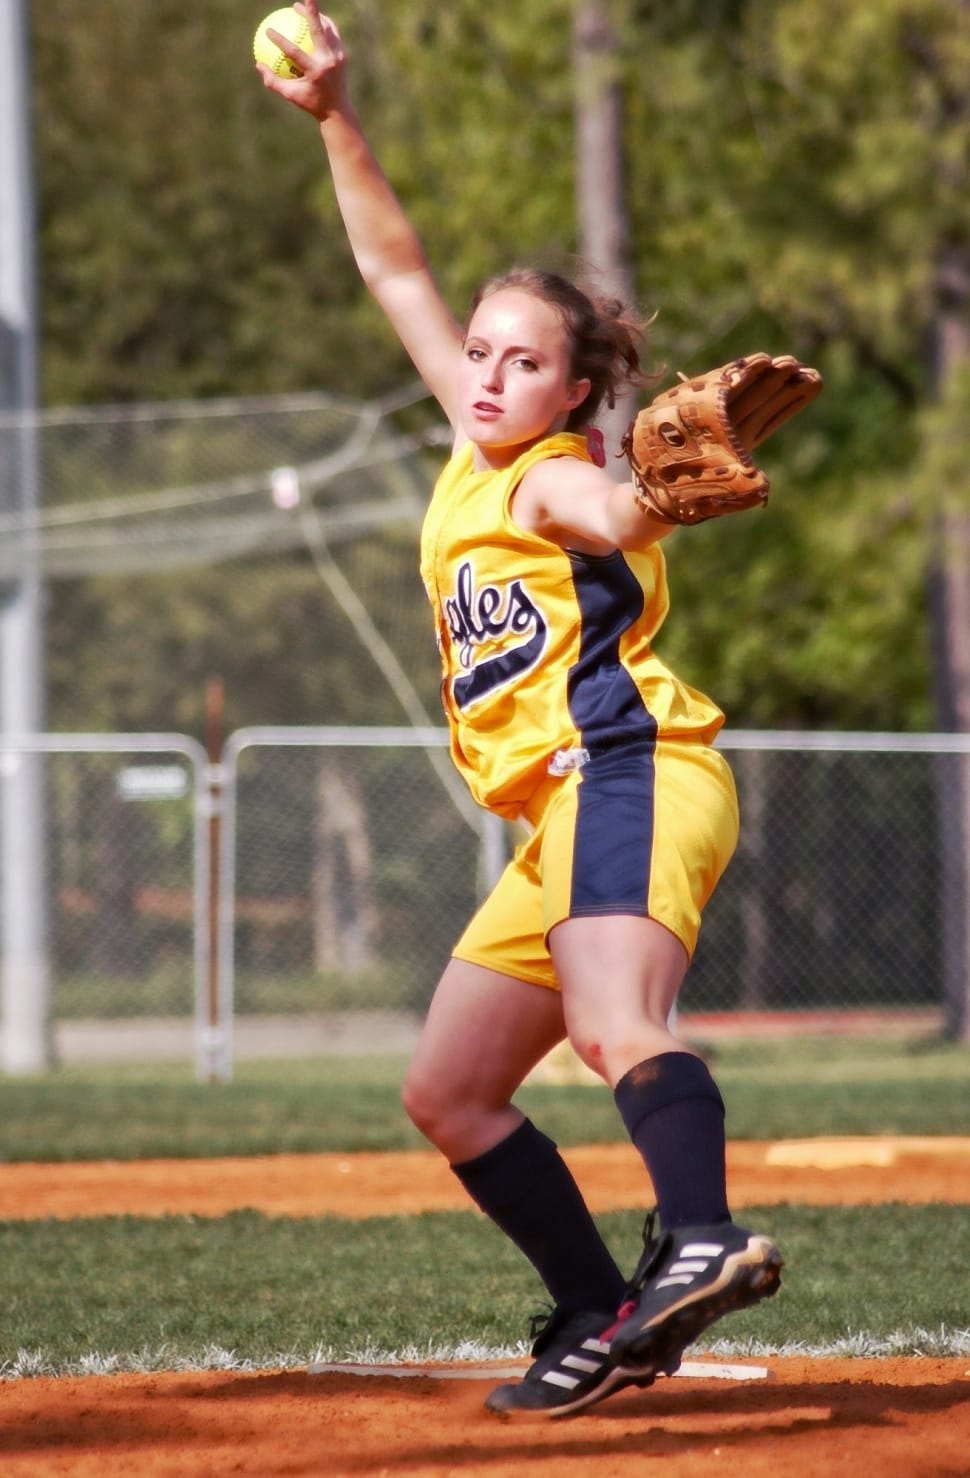 Softball, Pitching, Pitcher, Female, sport, playing preview